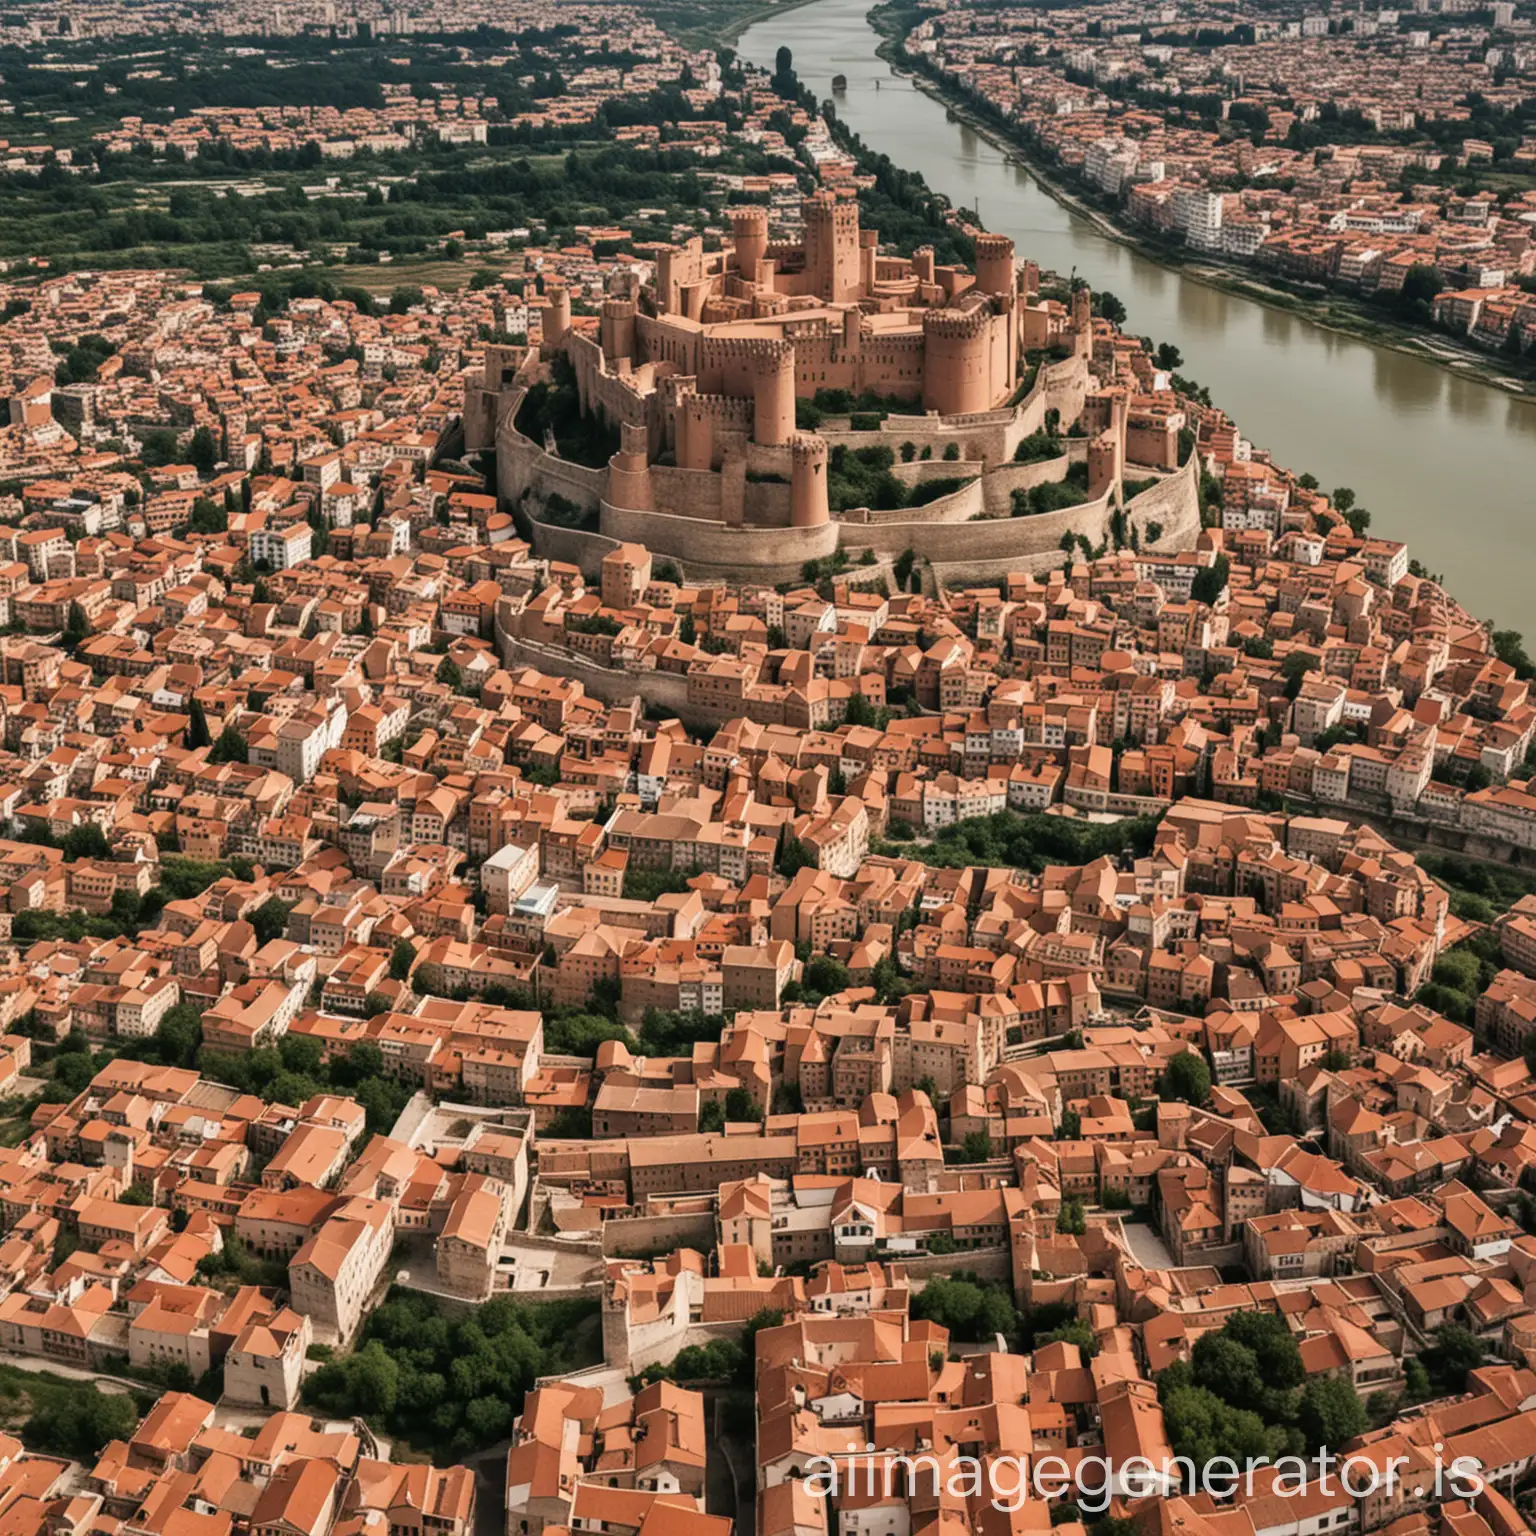 a capital city located on a river bend. Outside the walled city are vineyards. Many of the buildings are made with terracotta tiles. with a castle-palace in the center that overlooks it all